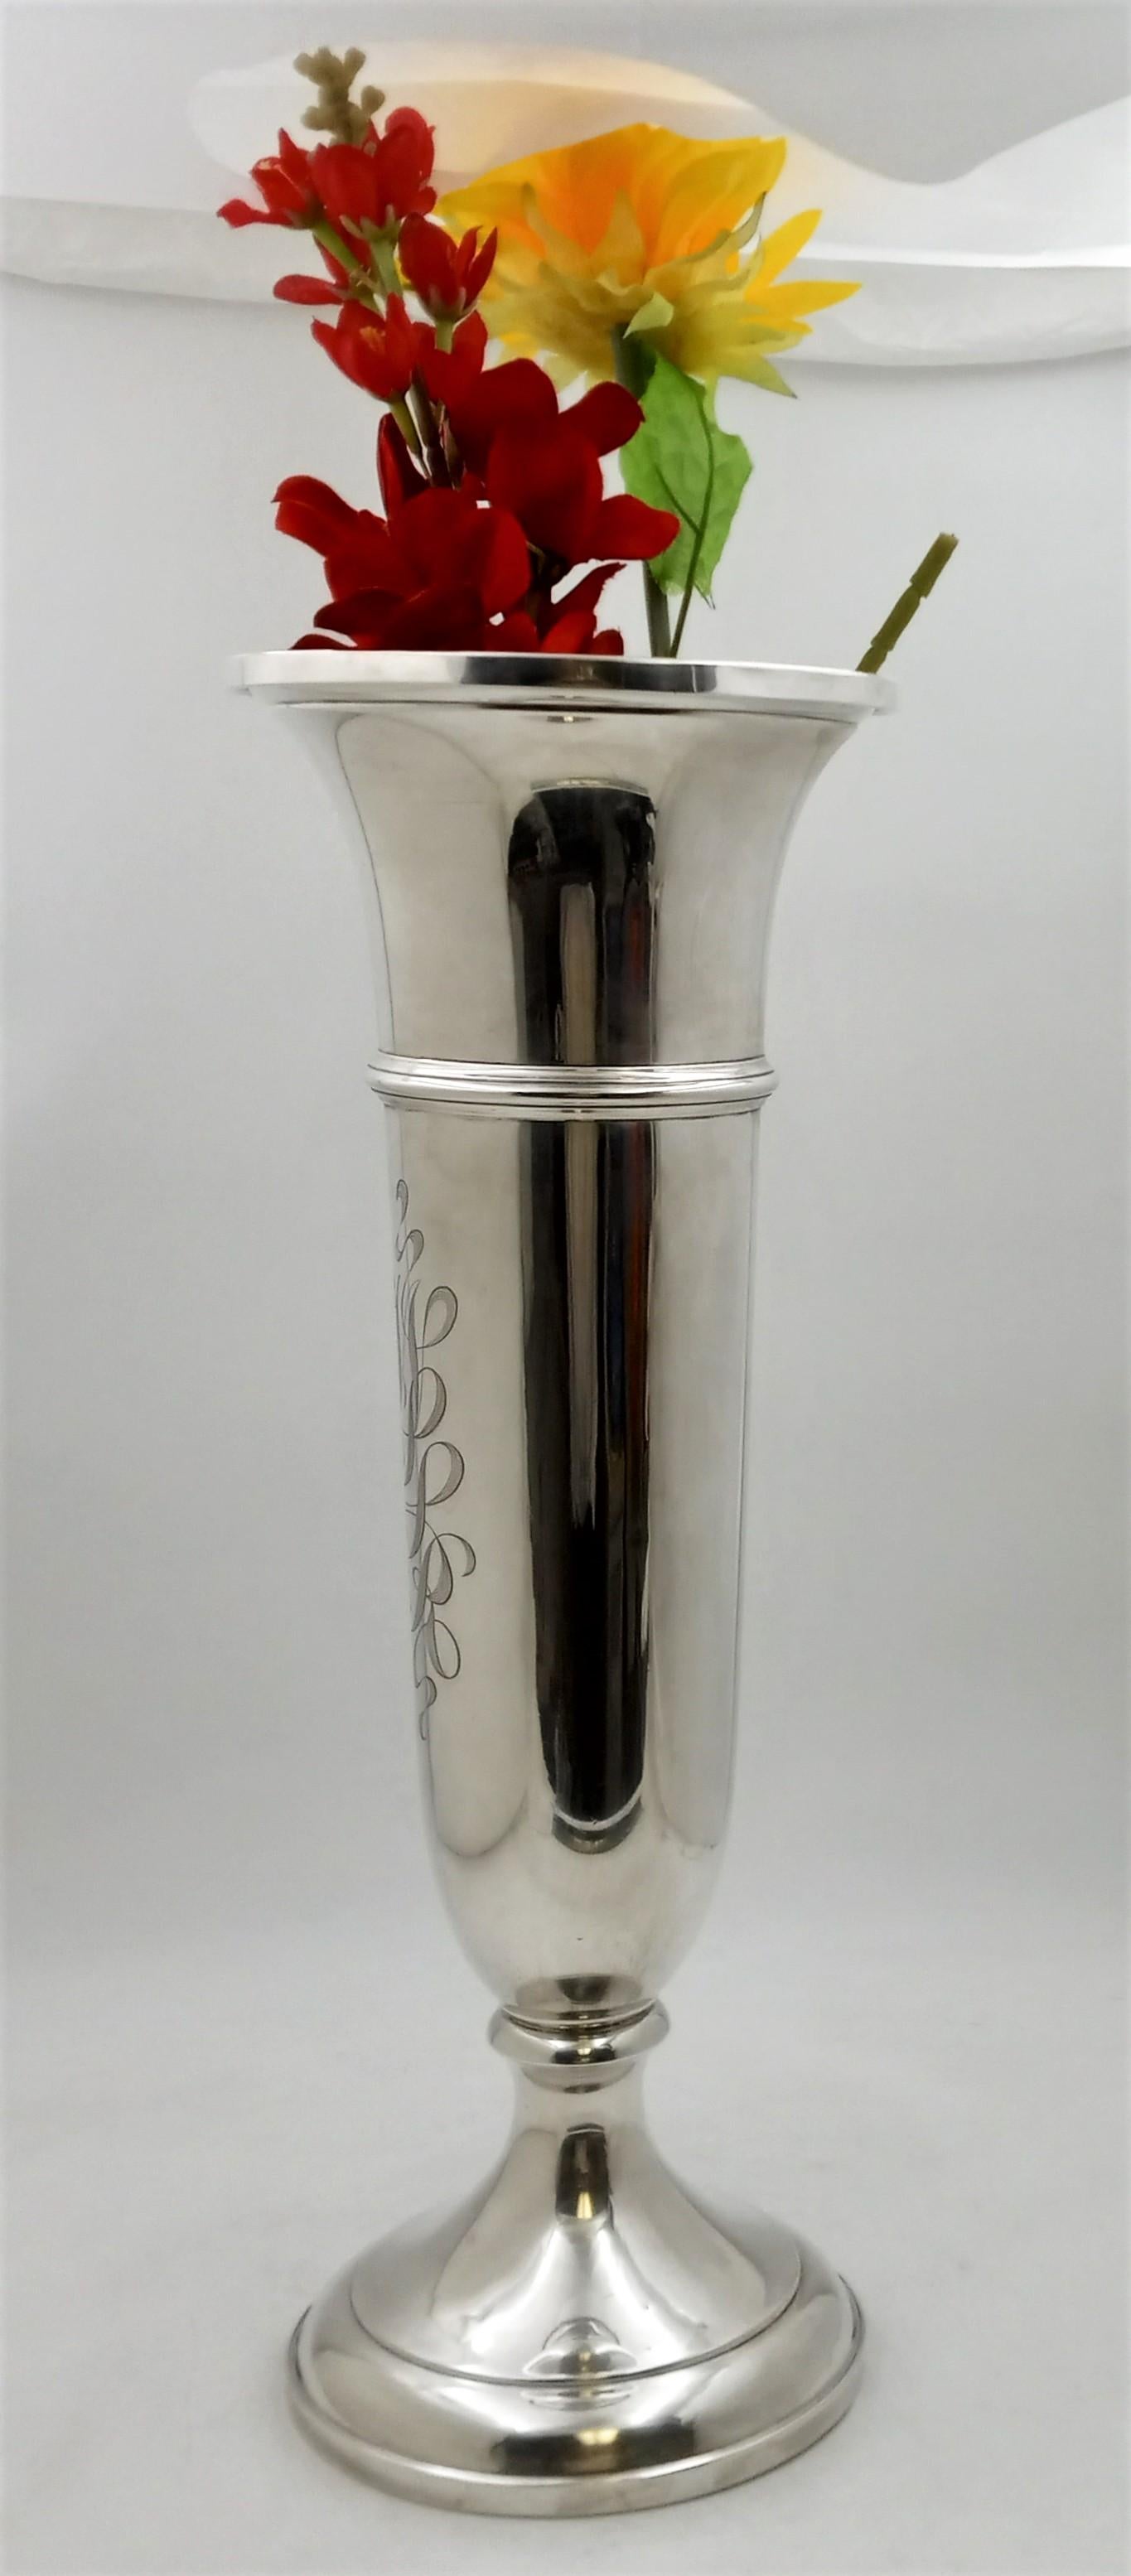 Black, Starr & Gorham sterling silver trumpet vase in palace size. Very majestic in its proportions, it displays a beautiful monogram and a gadrooned rim around the body. It measures an impressive 21 3/4'' in height by 8'' in diameter at the top, is